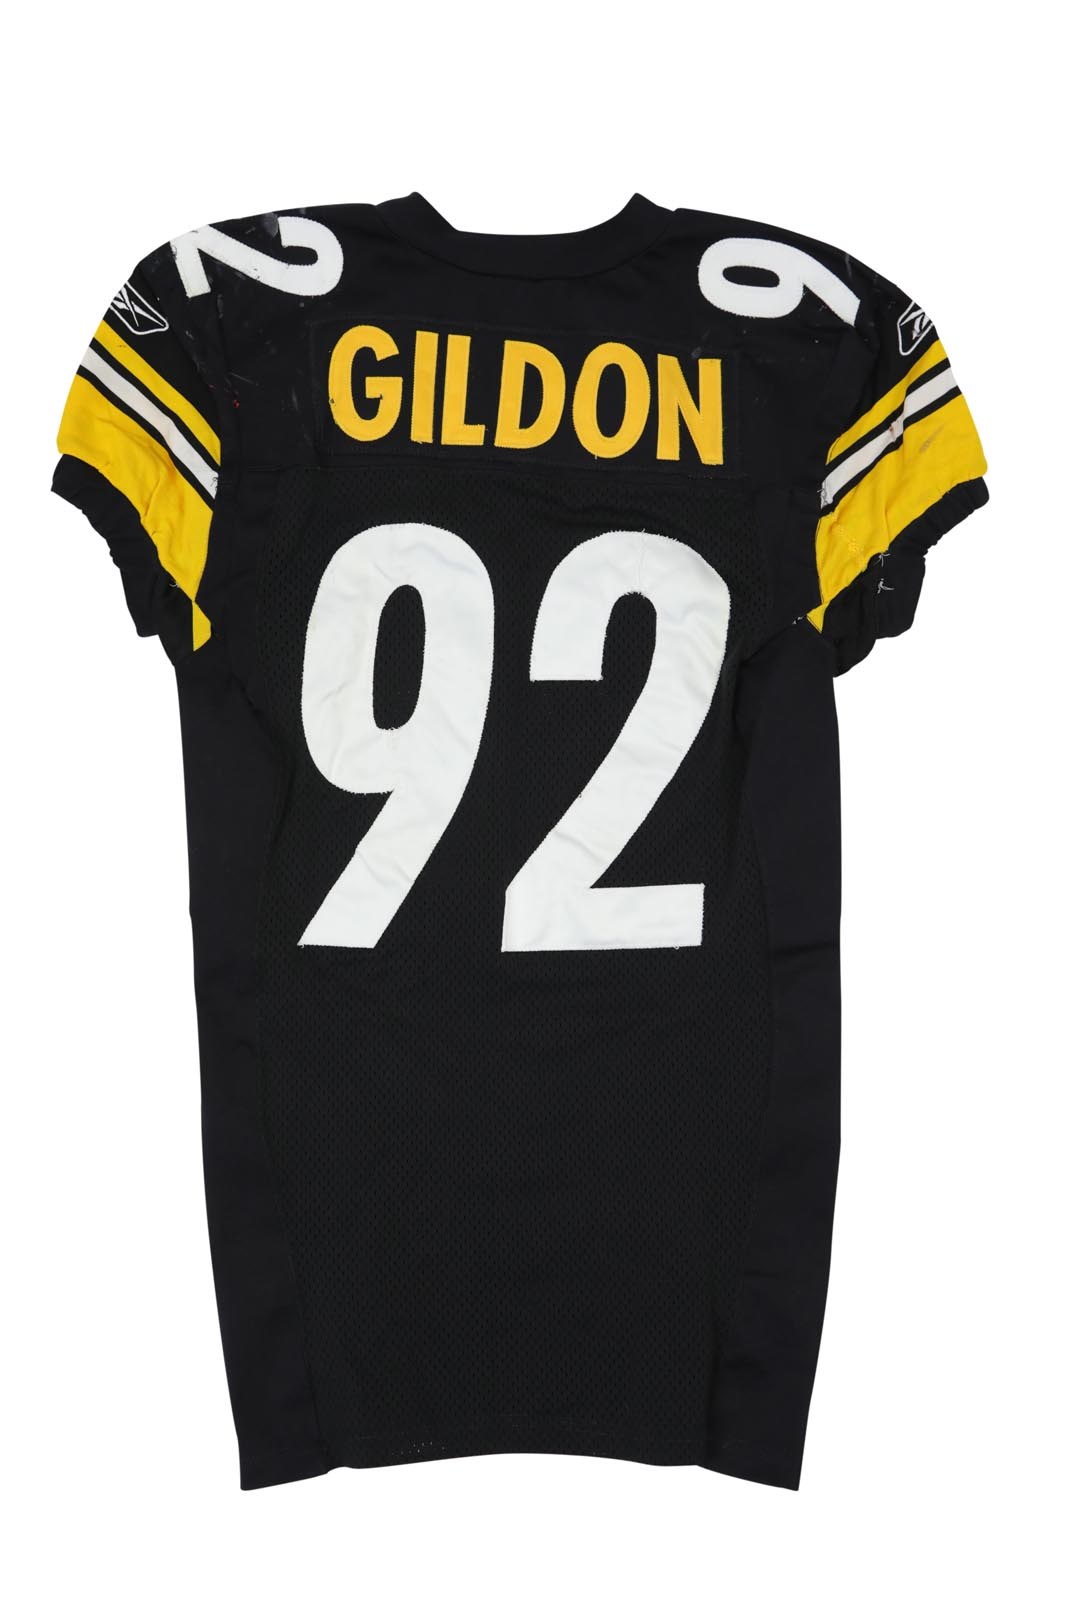 - 2001 Jason Gildon Game Used Pittsburgh Steelers Jersey - Including AFC Playoffs (Photo-Matched to Five Games, Steelers COA)